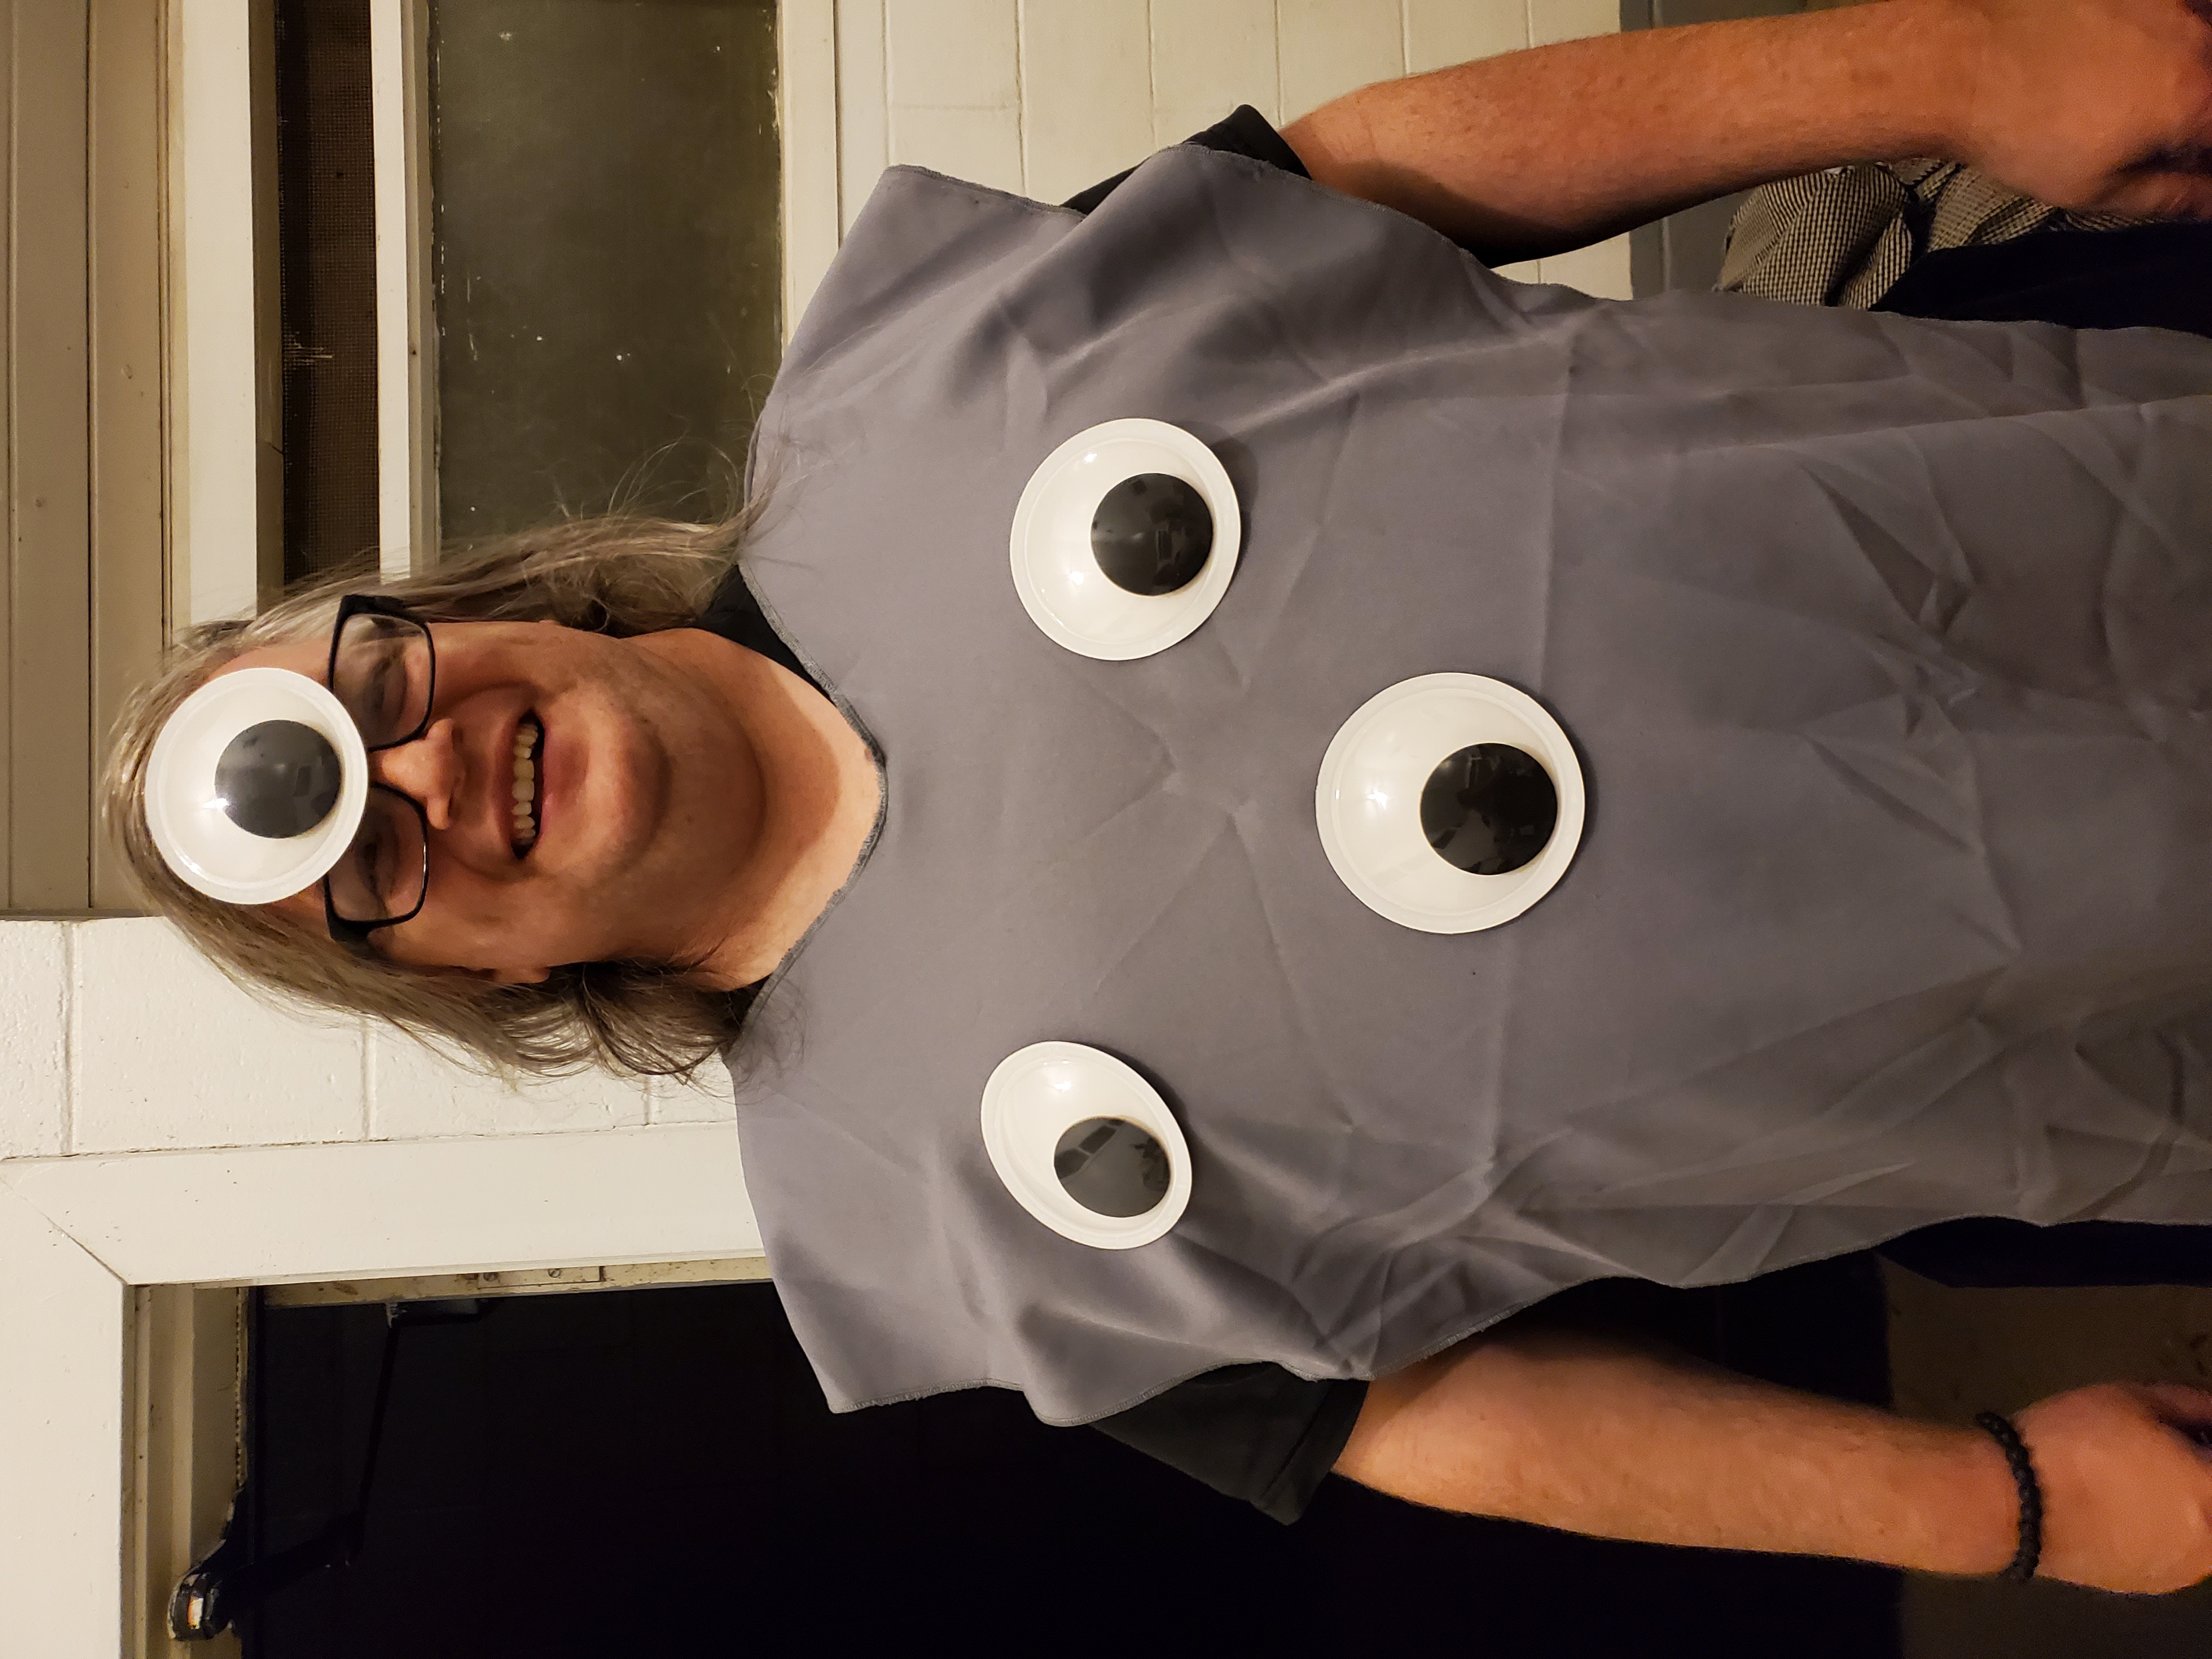 A lovely human wearing a grey tabard and googly eyes, photo by Barbara M